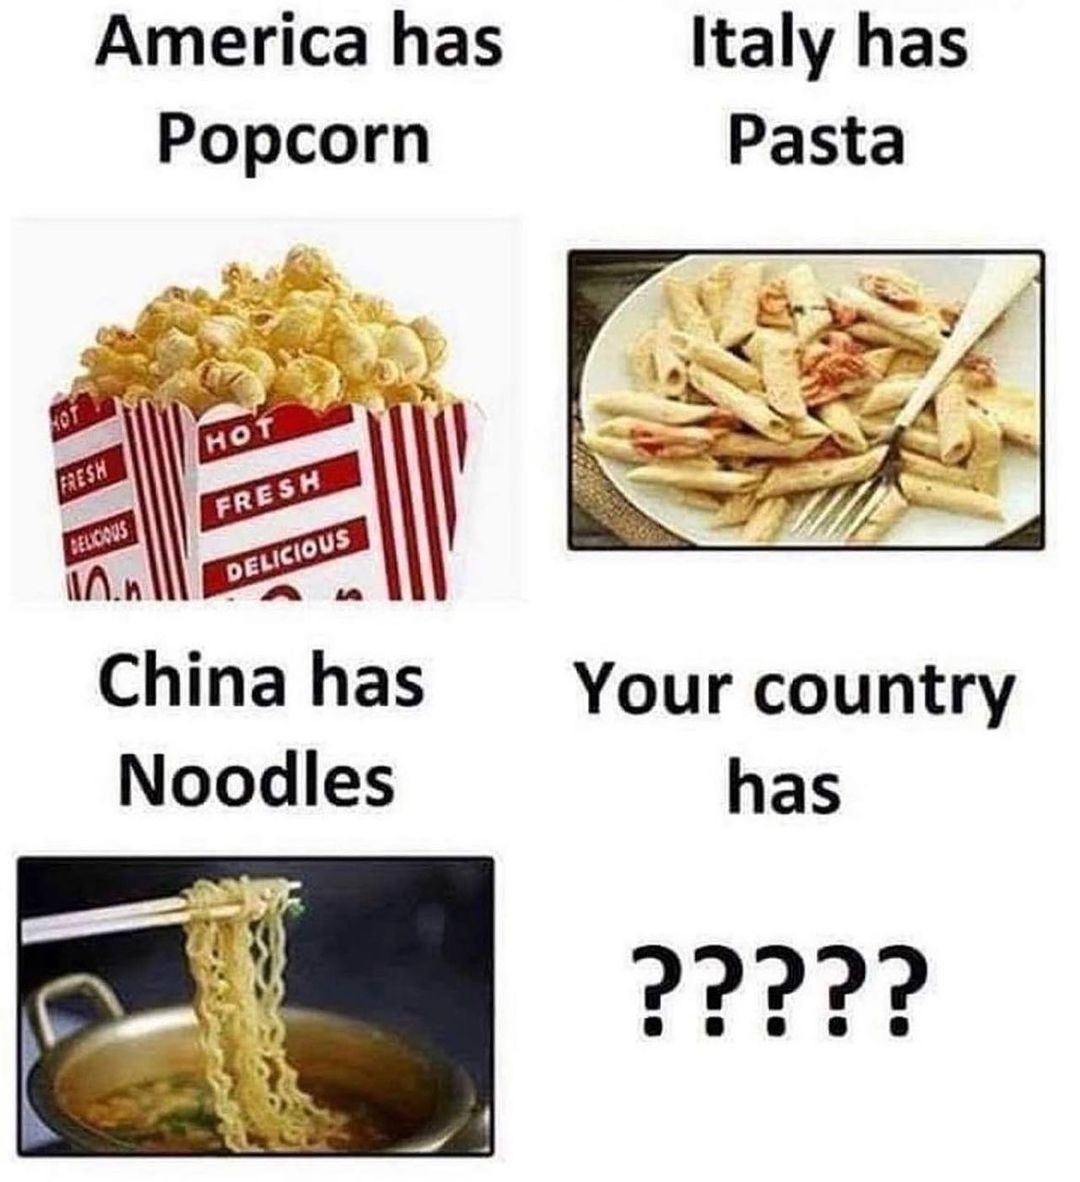 America has popcorn.  Italy has pasta.  China has noodles.  Your country has???